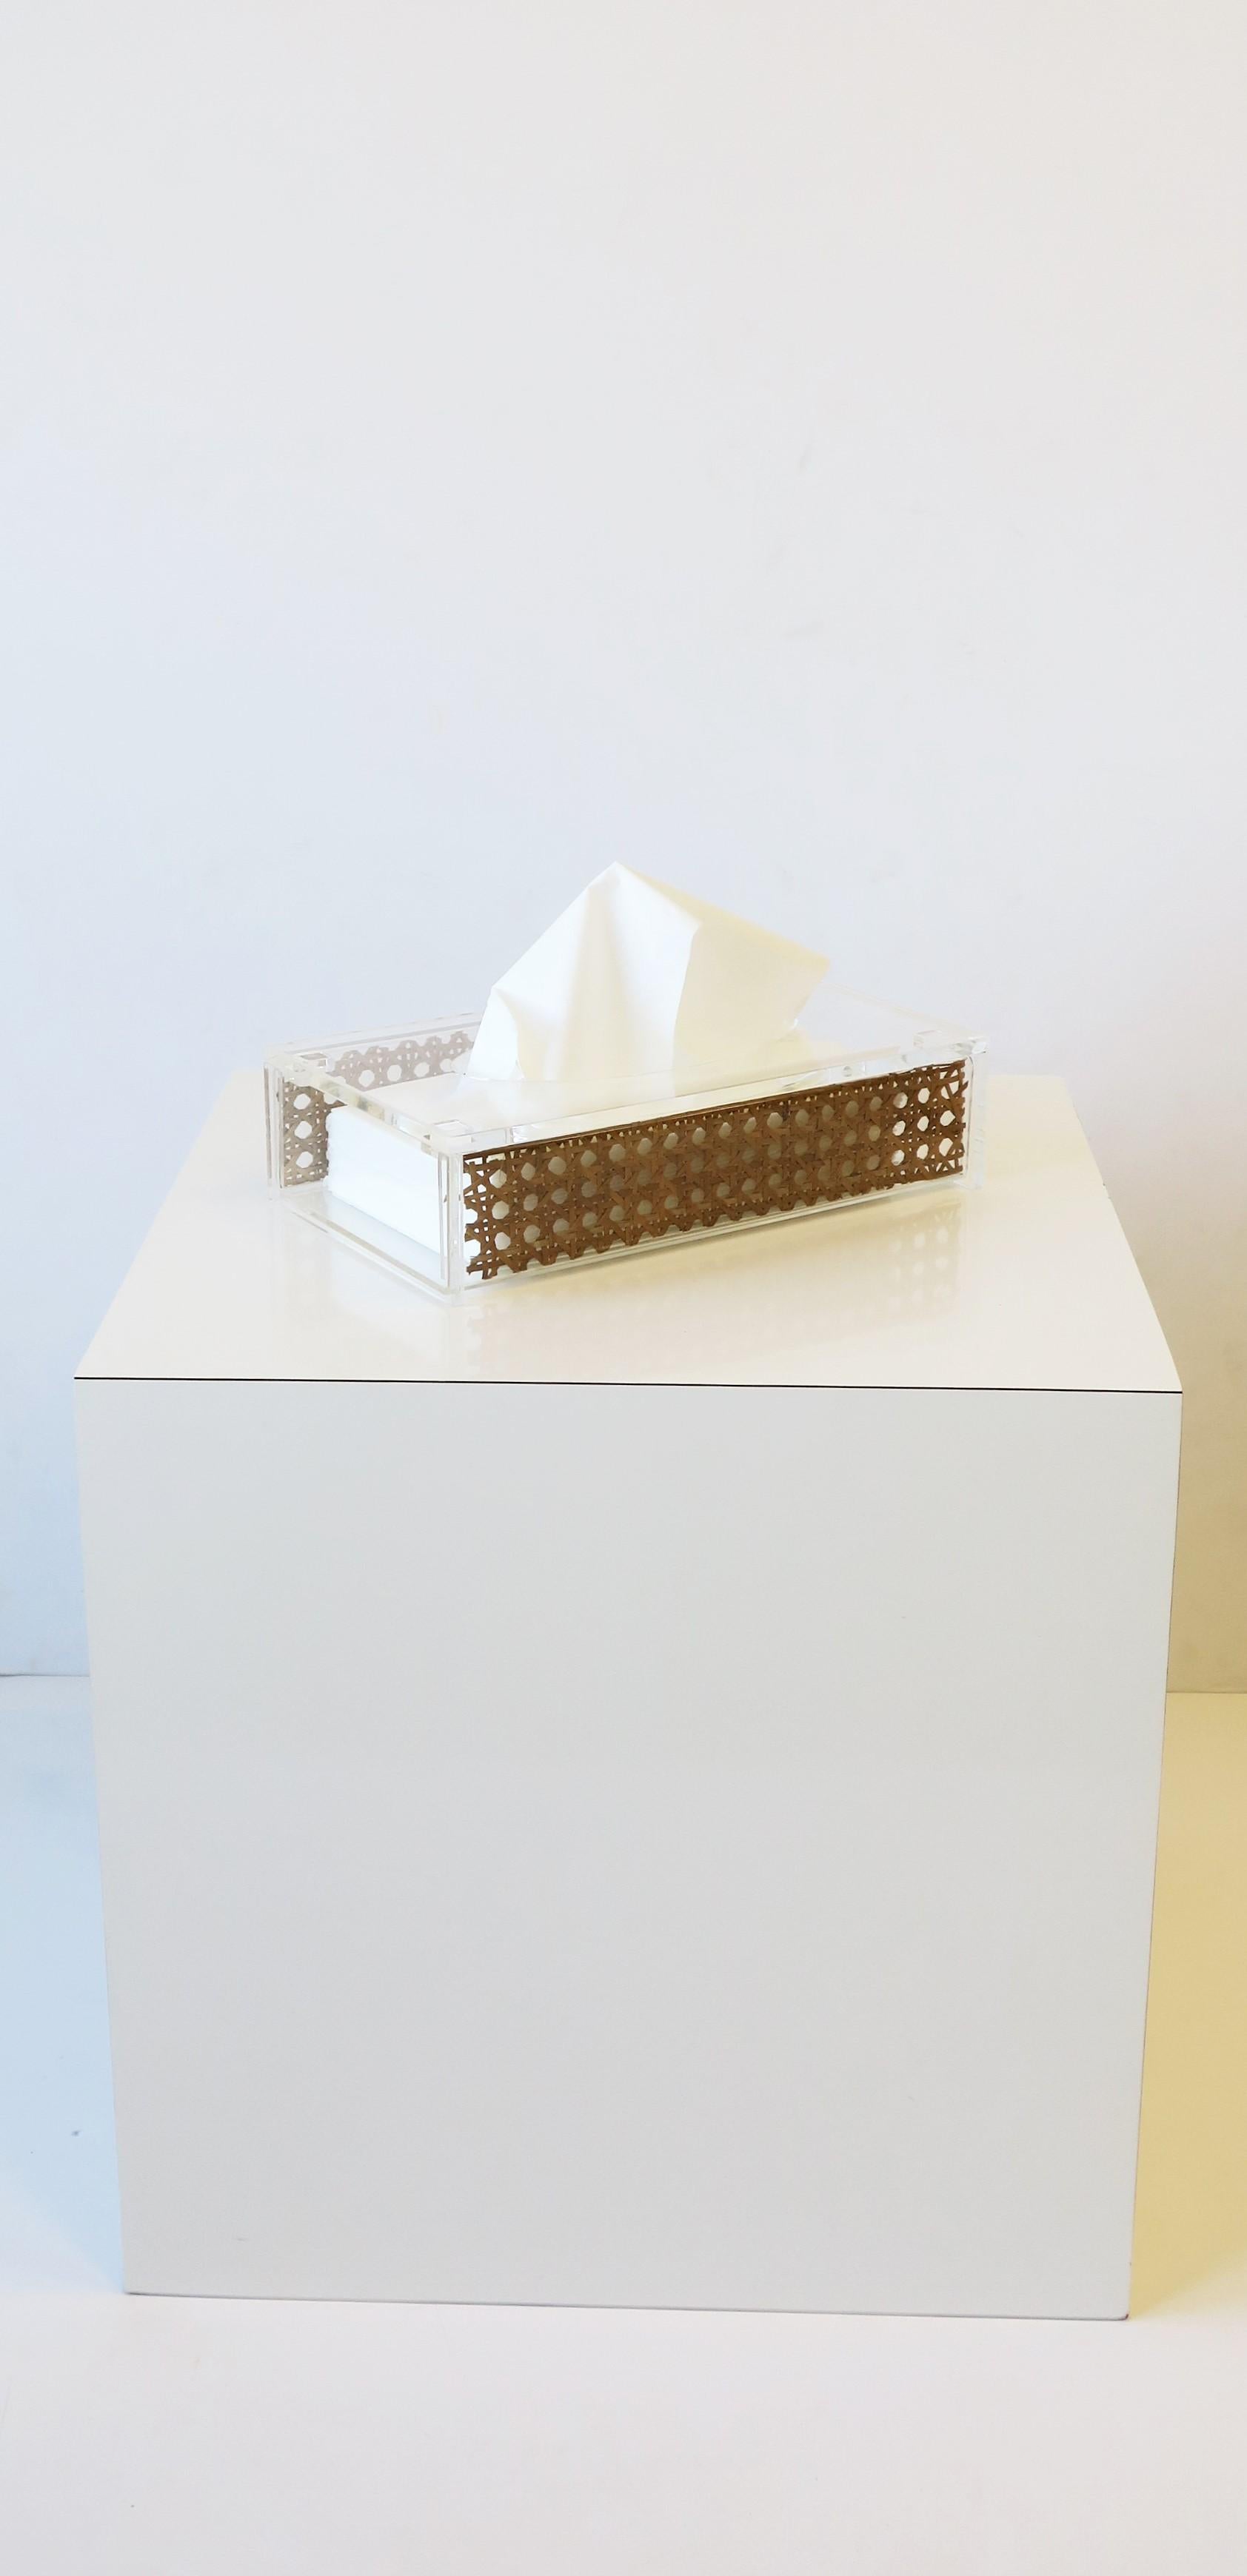 A wicker cane and acrylic tissue holder box in the style of Christian Dior Home. This acrylic and wicker cane box holds standard size tissues. Beautiful natural wicker cane and chic clear acrylic - a great combination as shown. Natural wicker cane